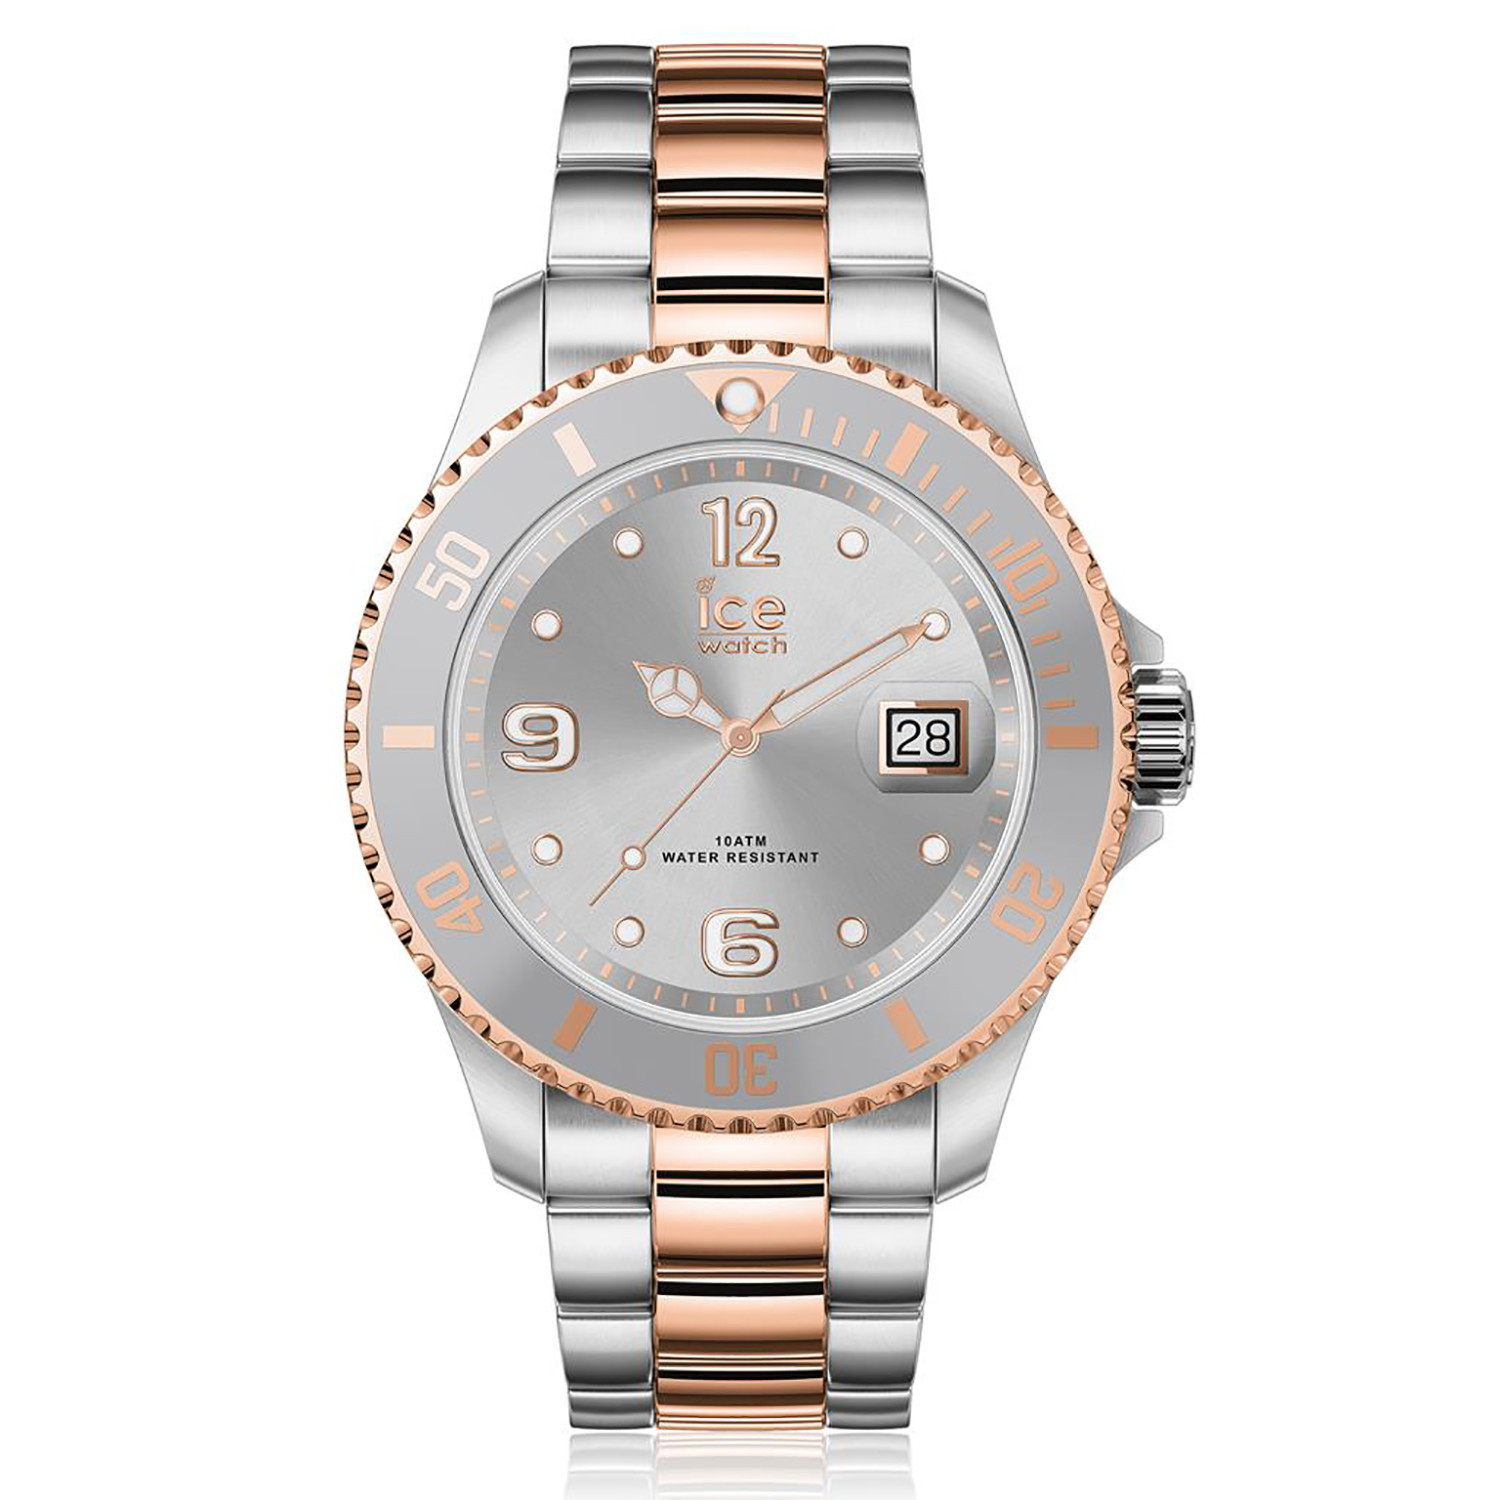 Montre femme Ice Watch steel silver rose-gold small